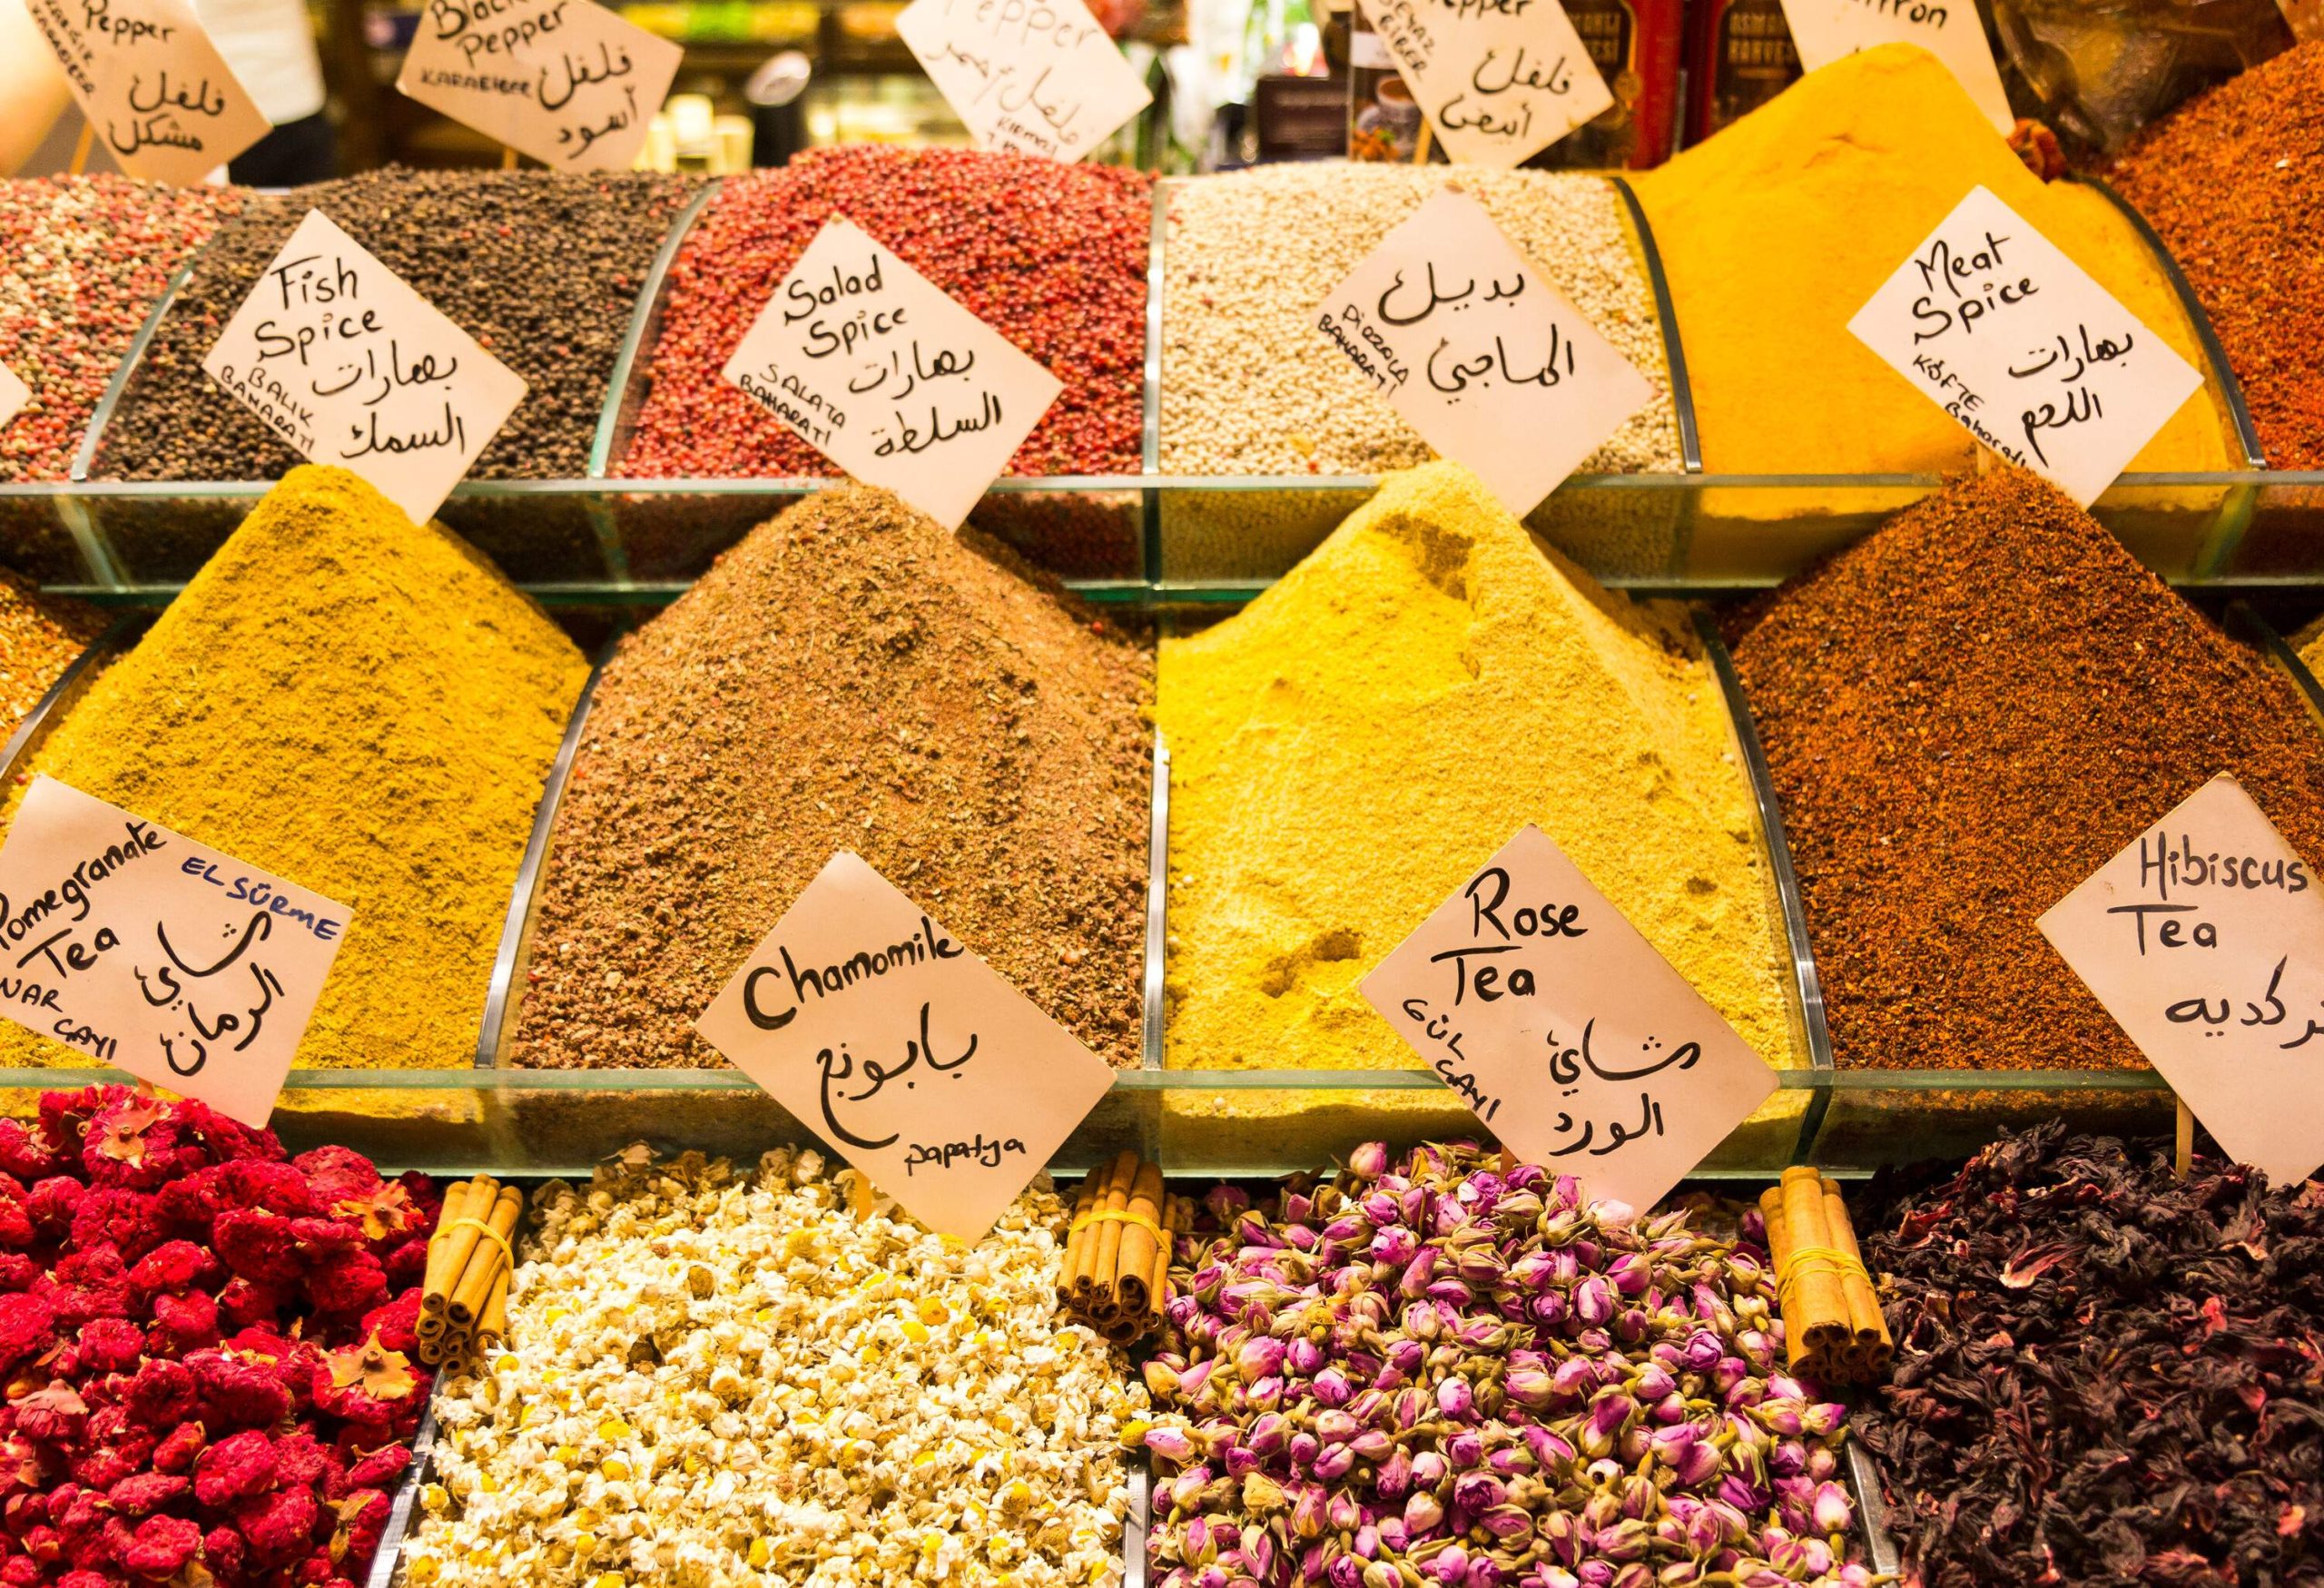 Mounds of colourful ground spices in glass containers on display.